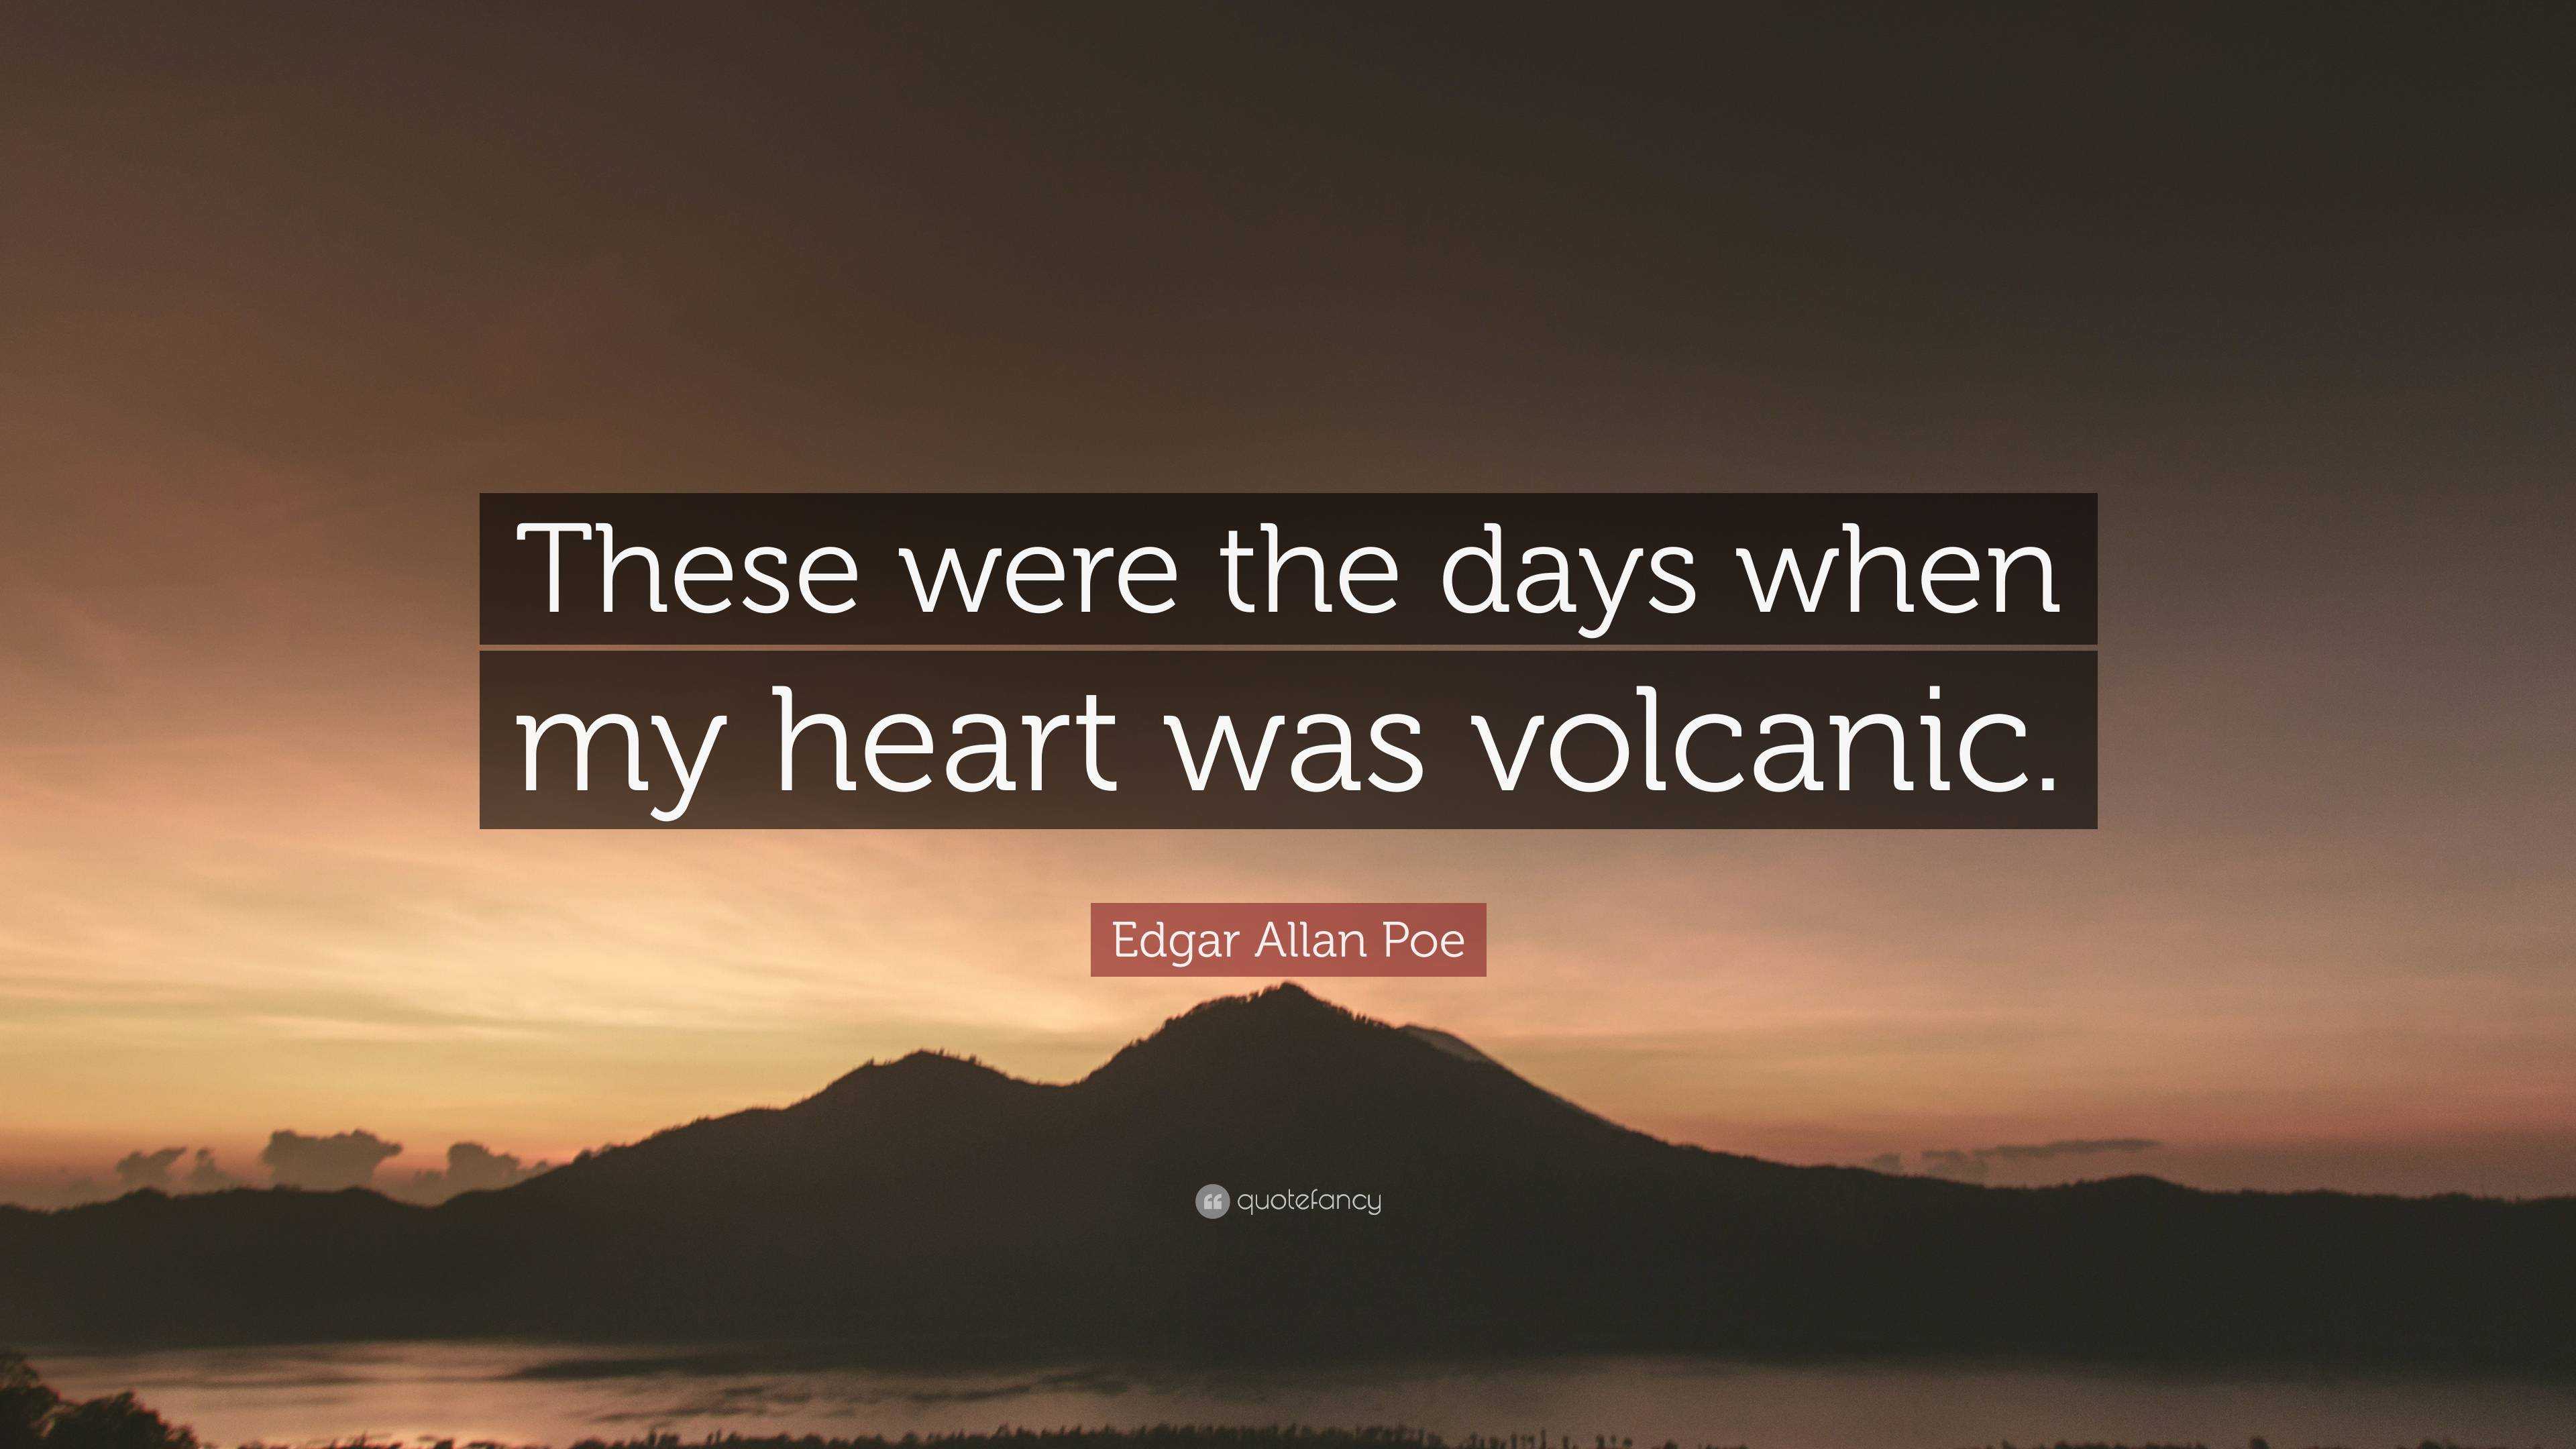 Edgar Allan Poe Quote: “These were the days when my heart was volcanic.”